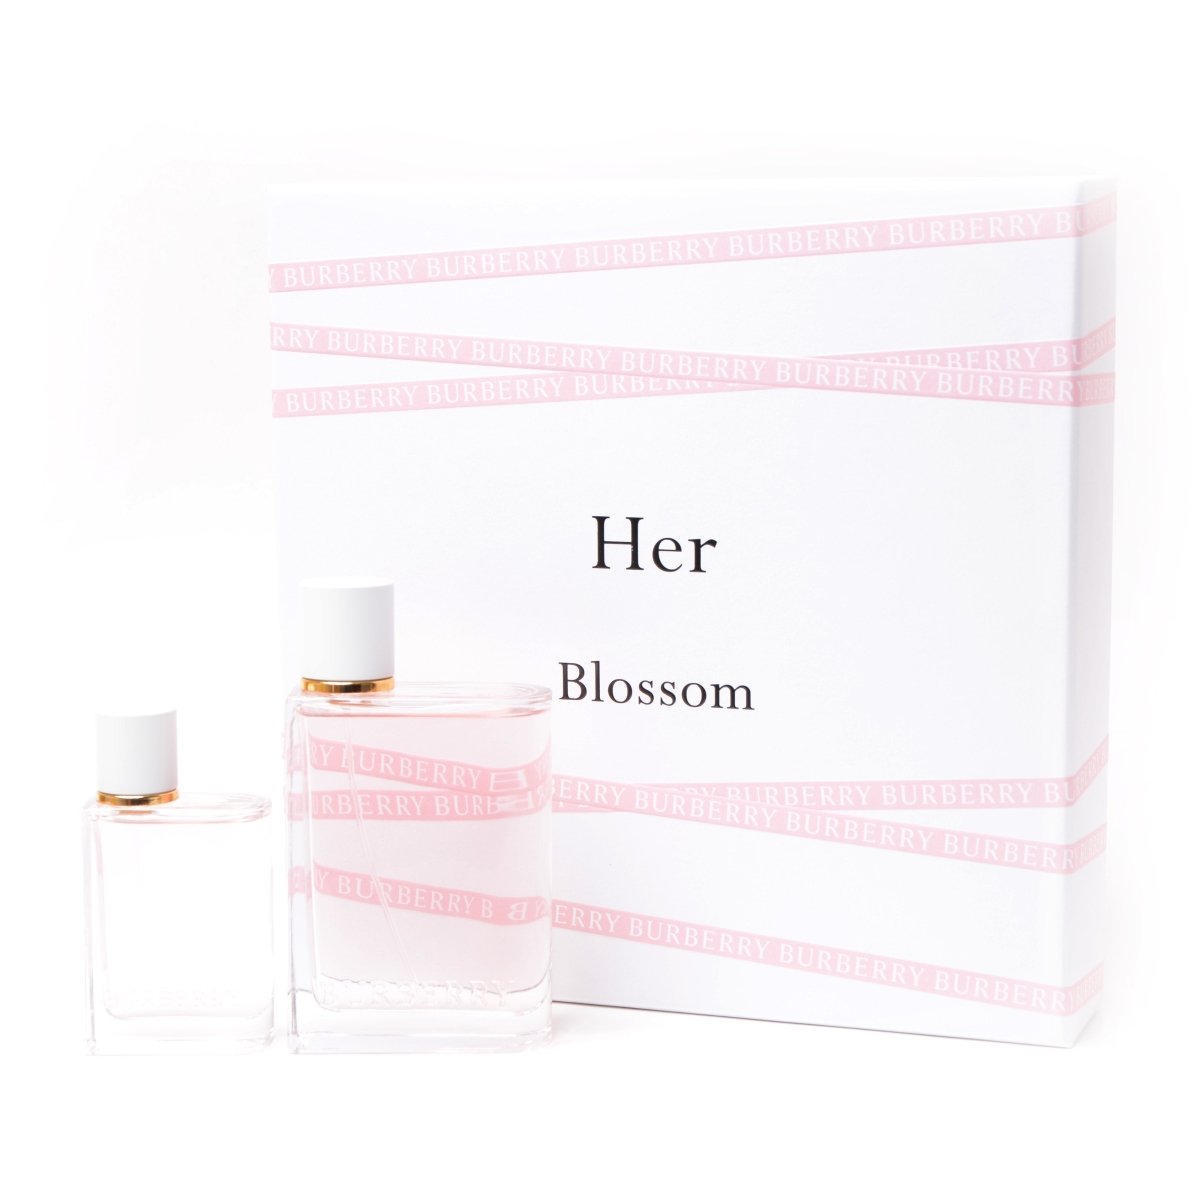 Burberry Her Blossom Gift Set for Women by Burberry